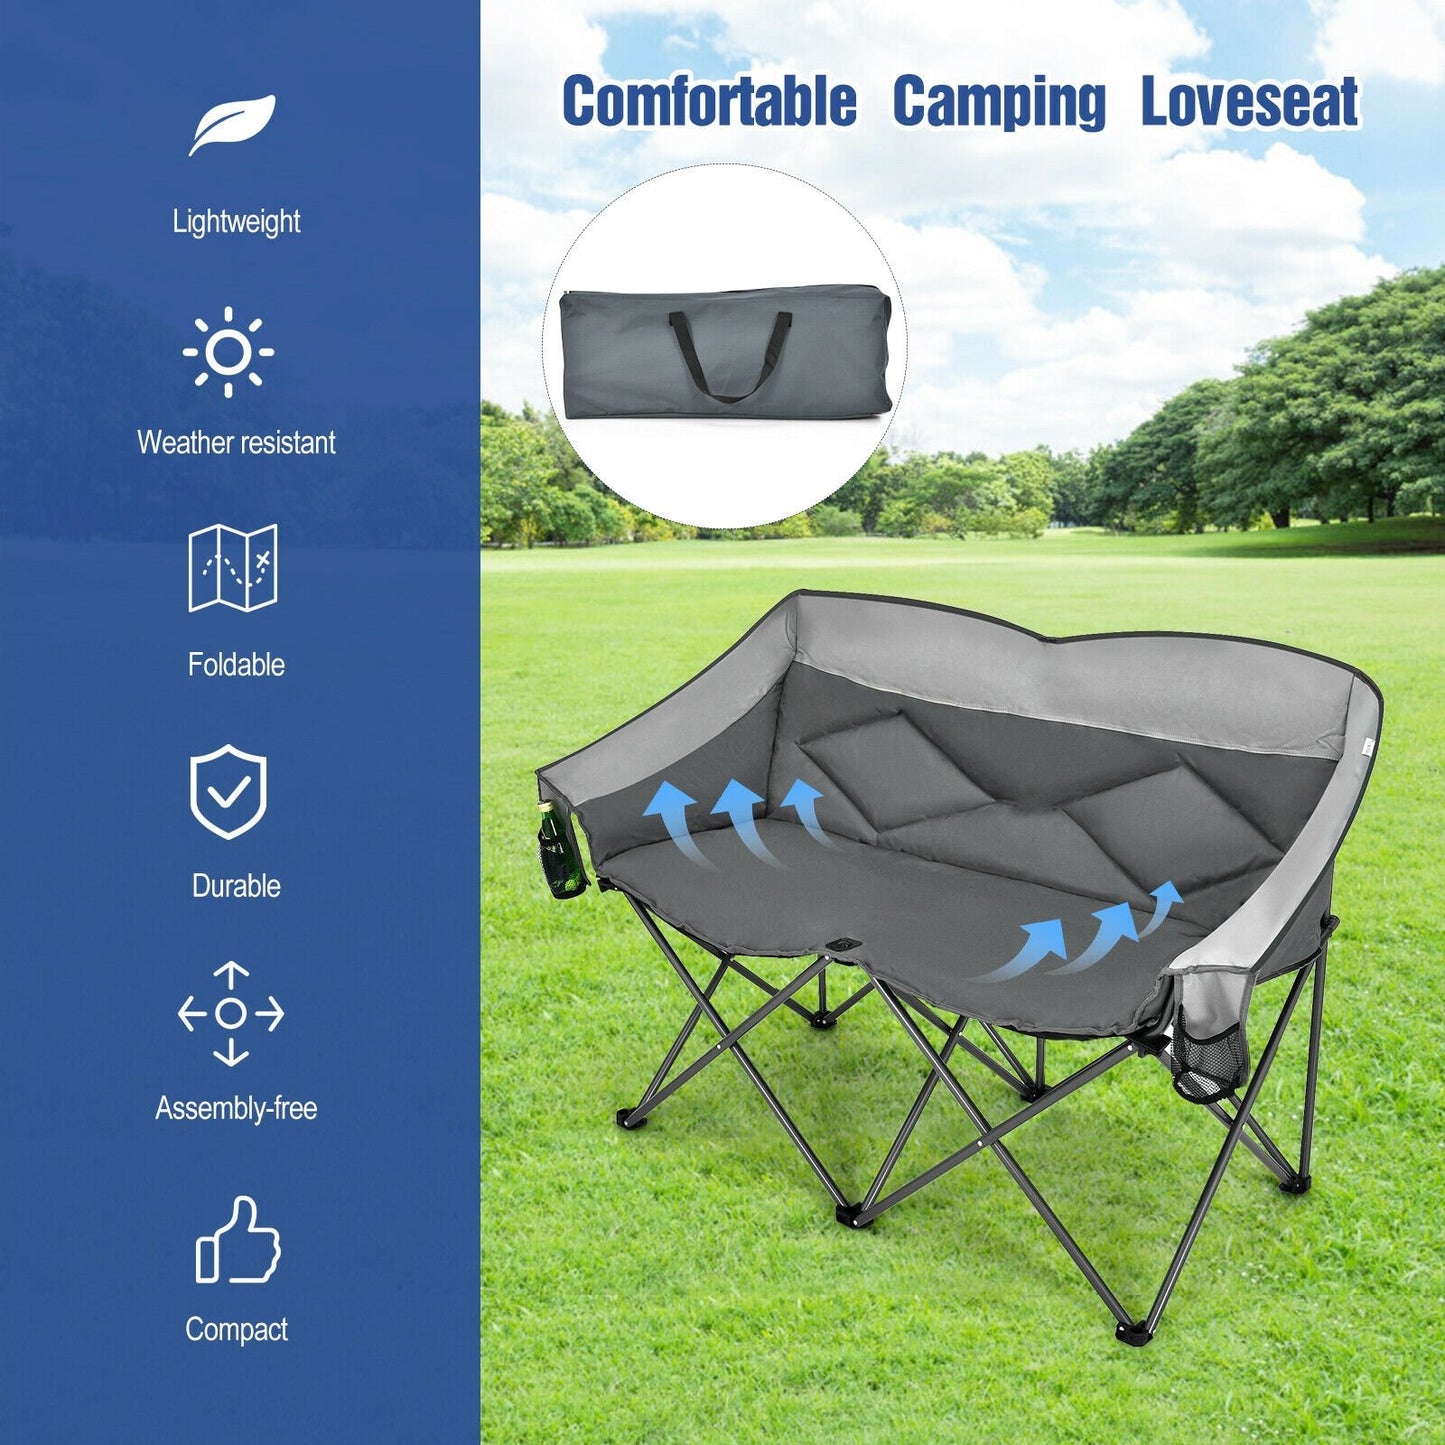 Folding Camping Chair with Bags and Padded Backrest, Gray - Gallery Canada